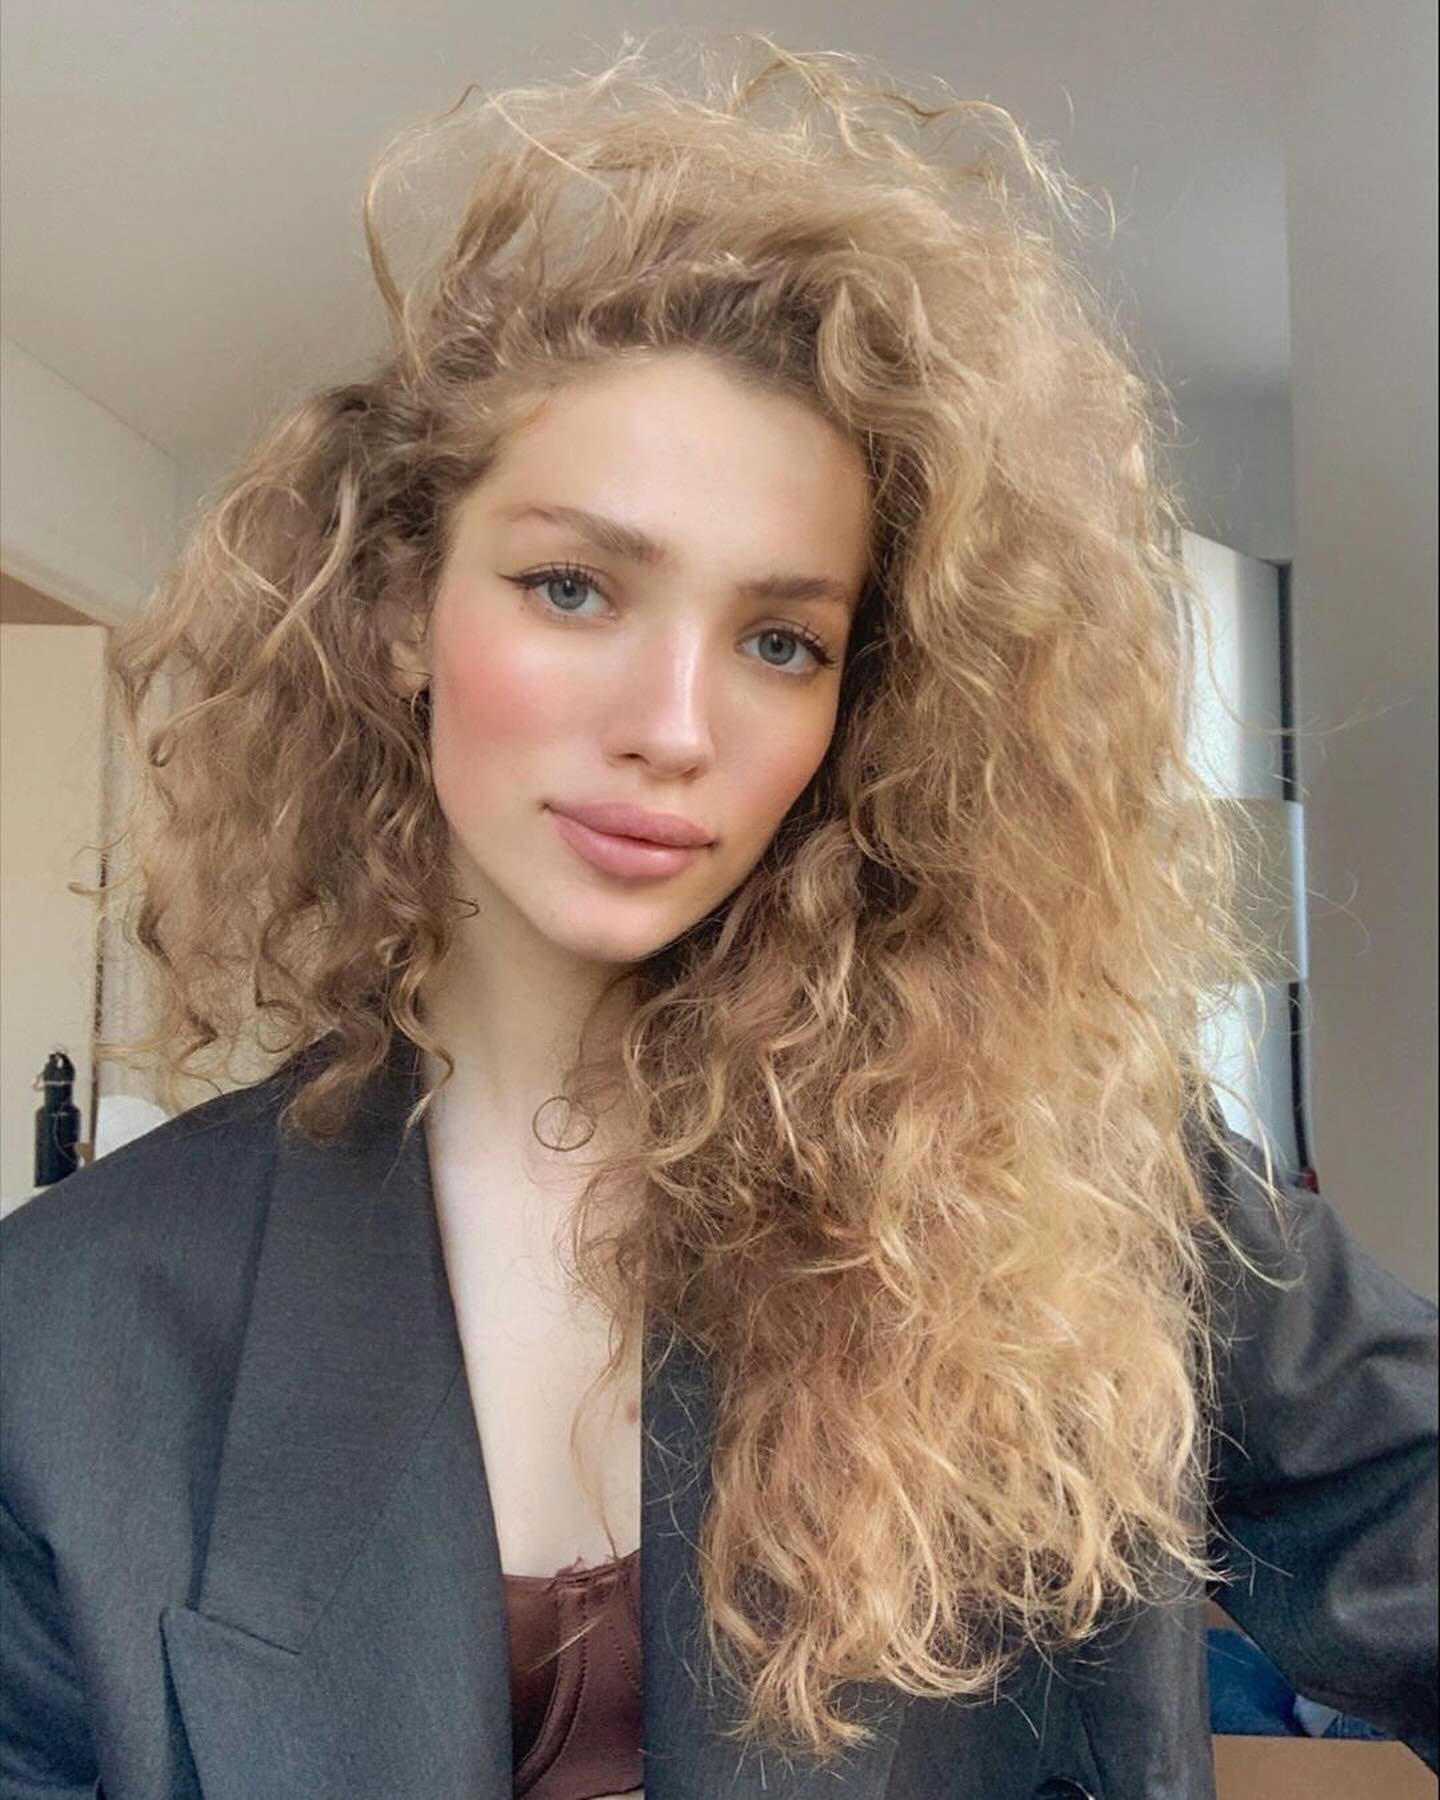 Inspo:
One of the nicest heads of hair we have seen. 💯 @tanyakizko 

Not fighting her natural frizz and embracing all the texture and volume

#inspo #frizz #naturalhair curls #waves #bighair